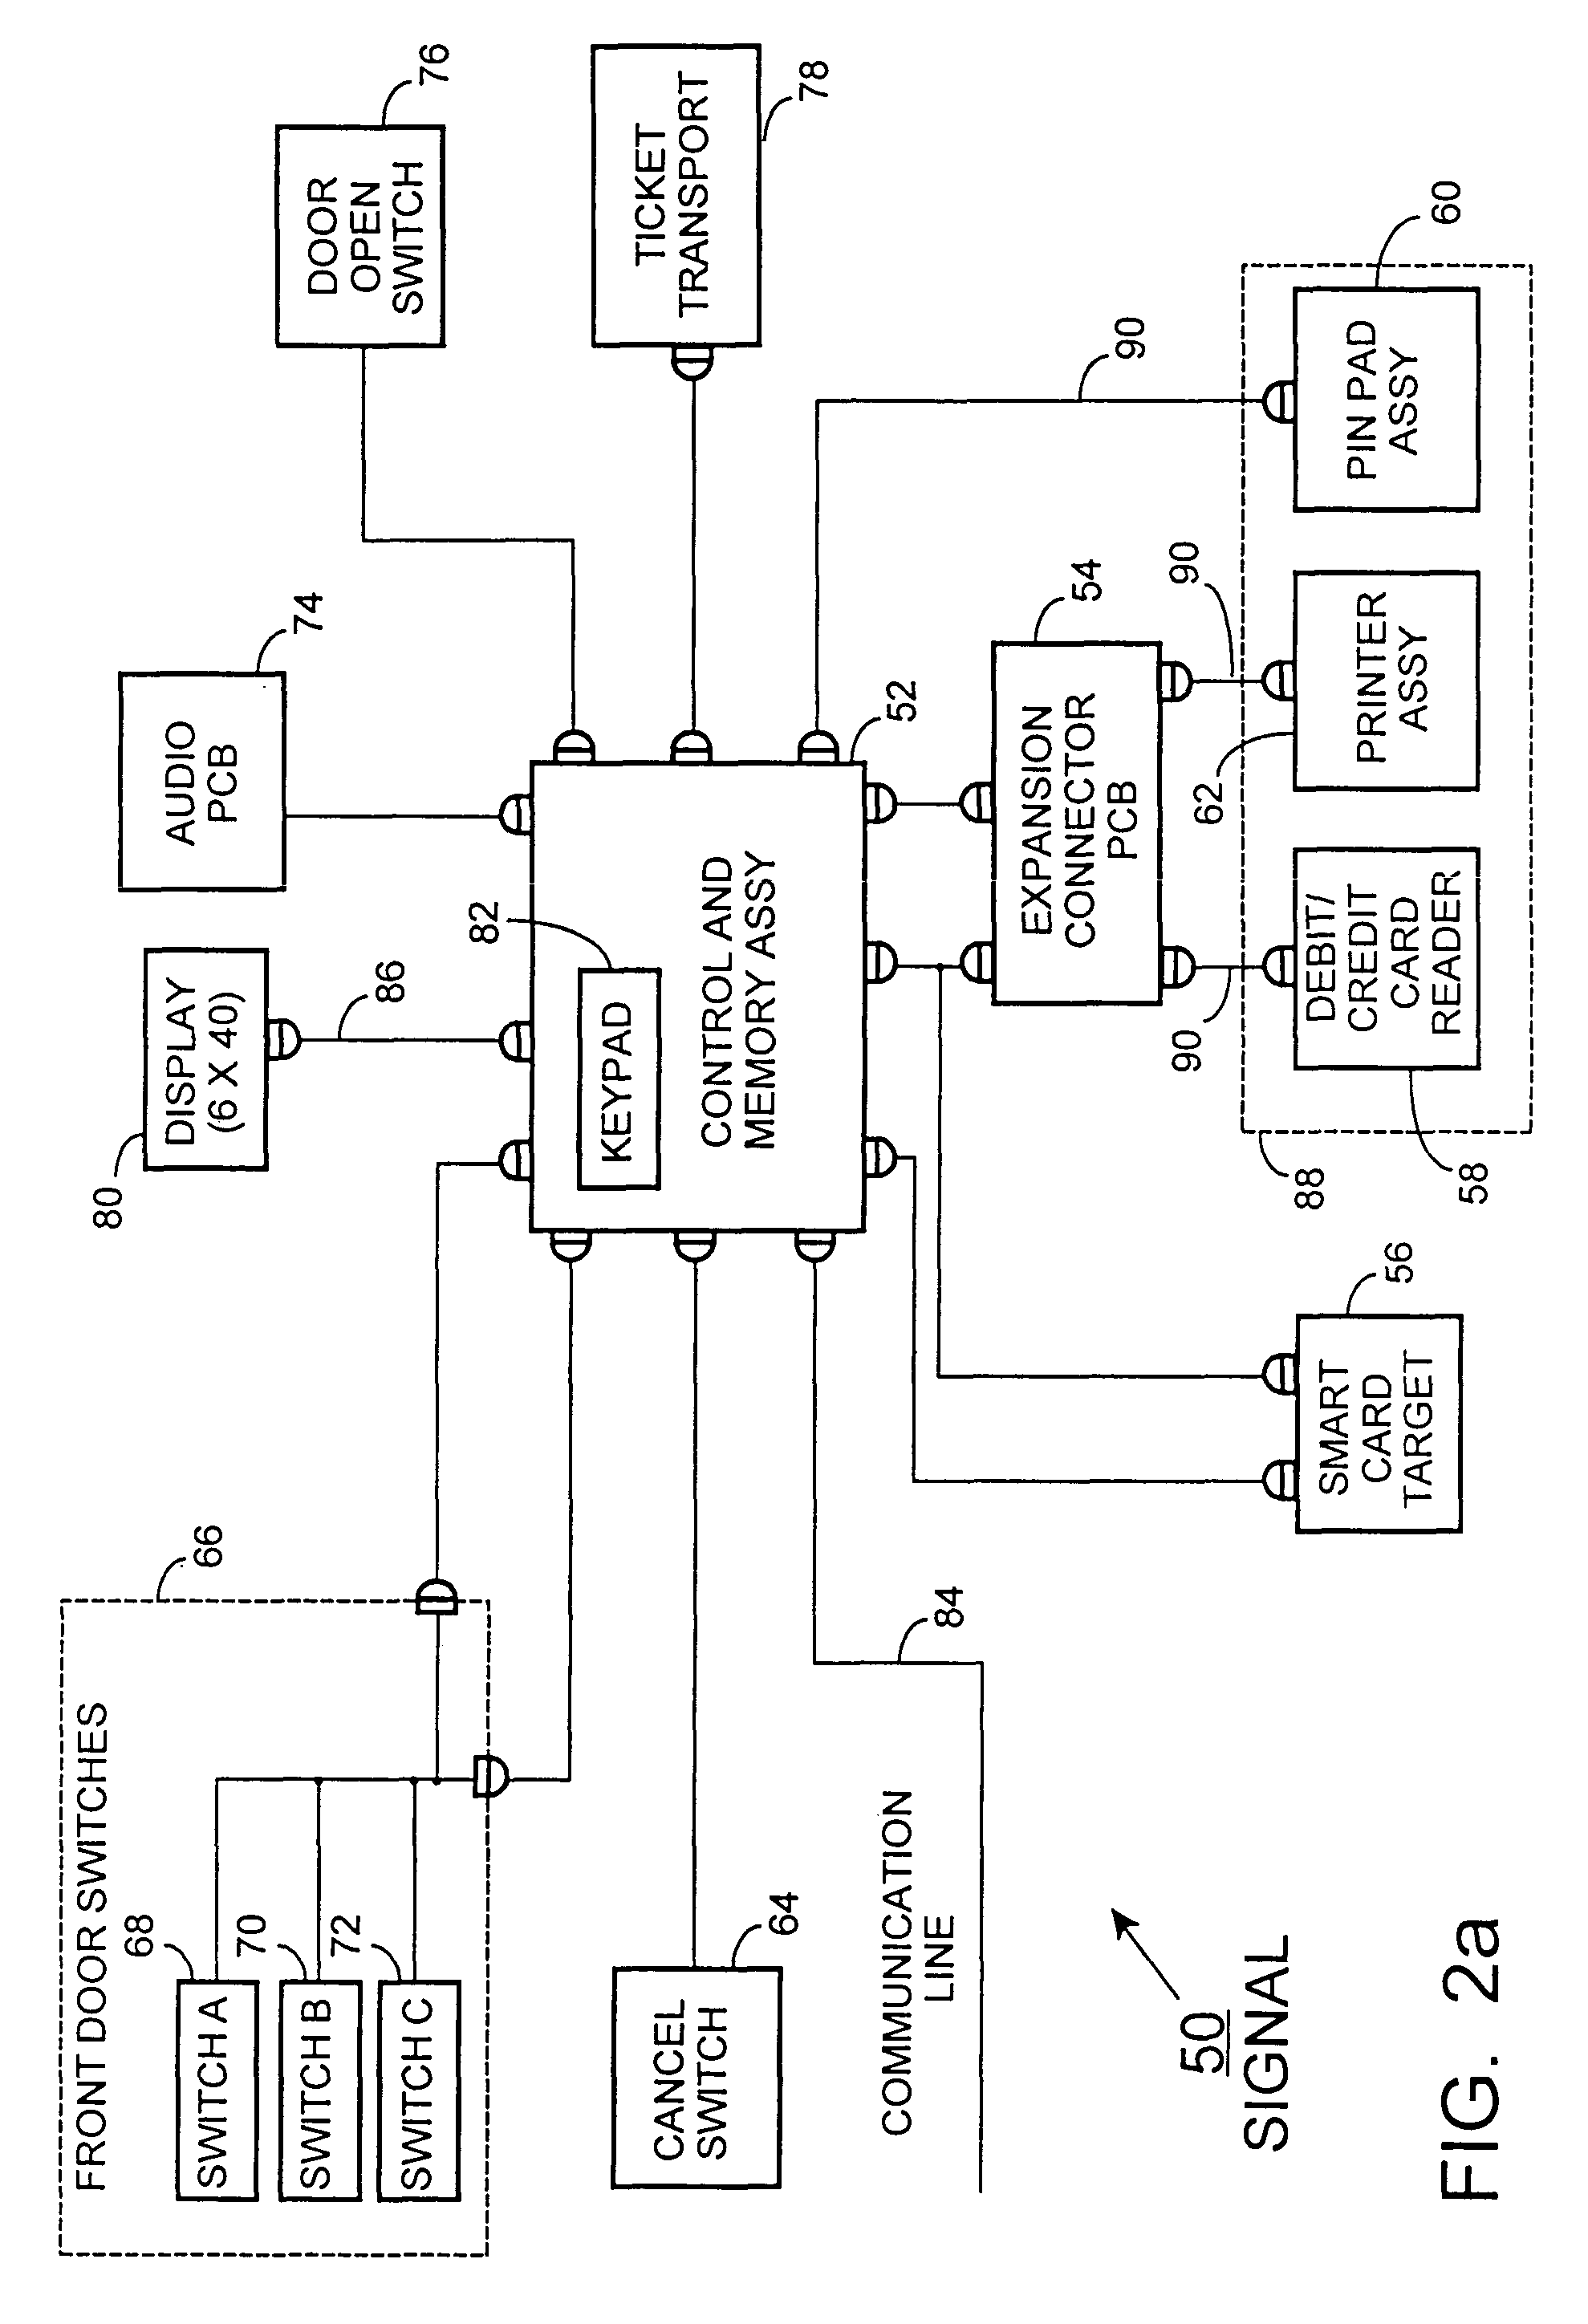 System for rapidly dispensing and adding value to fare cards